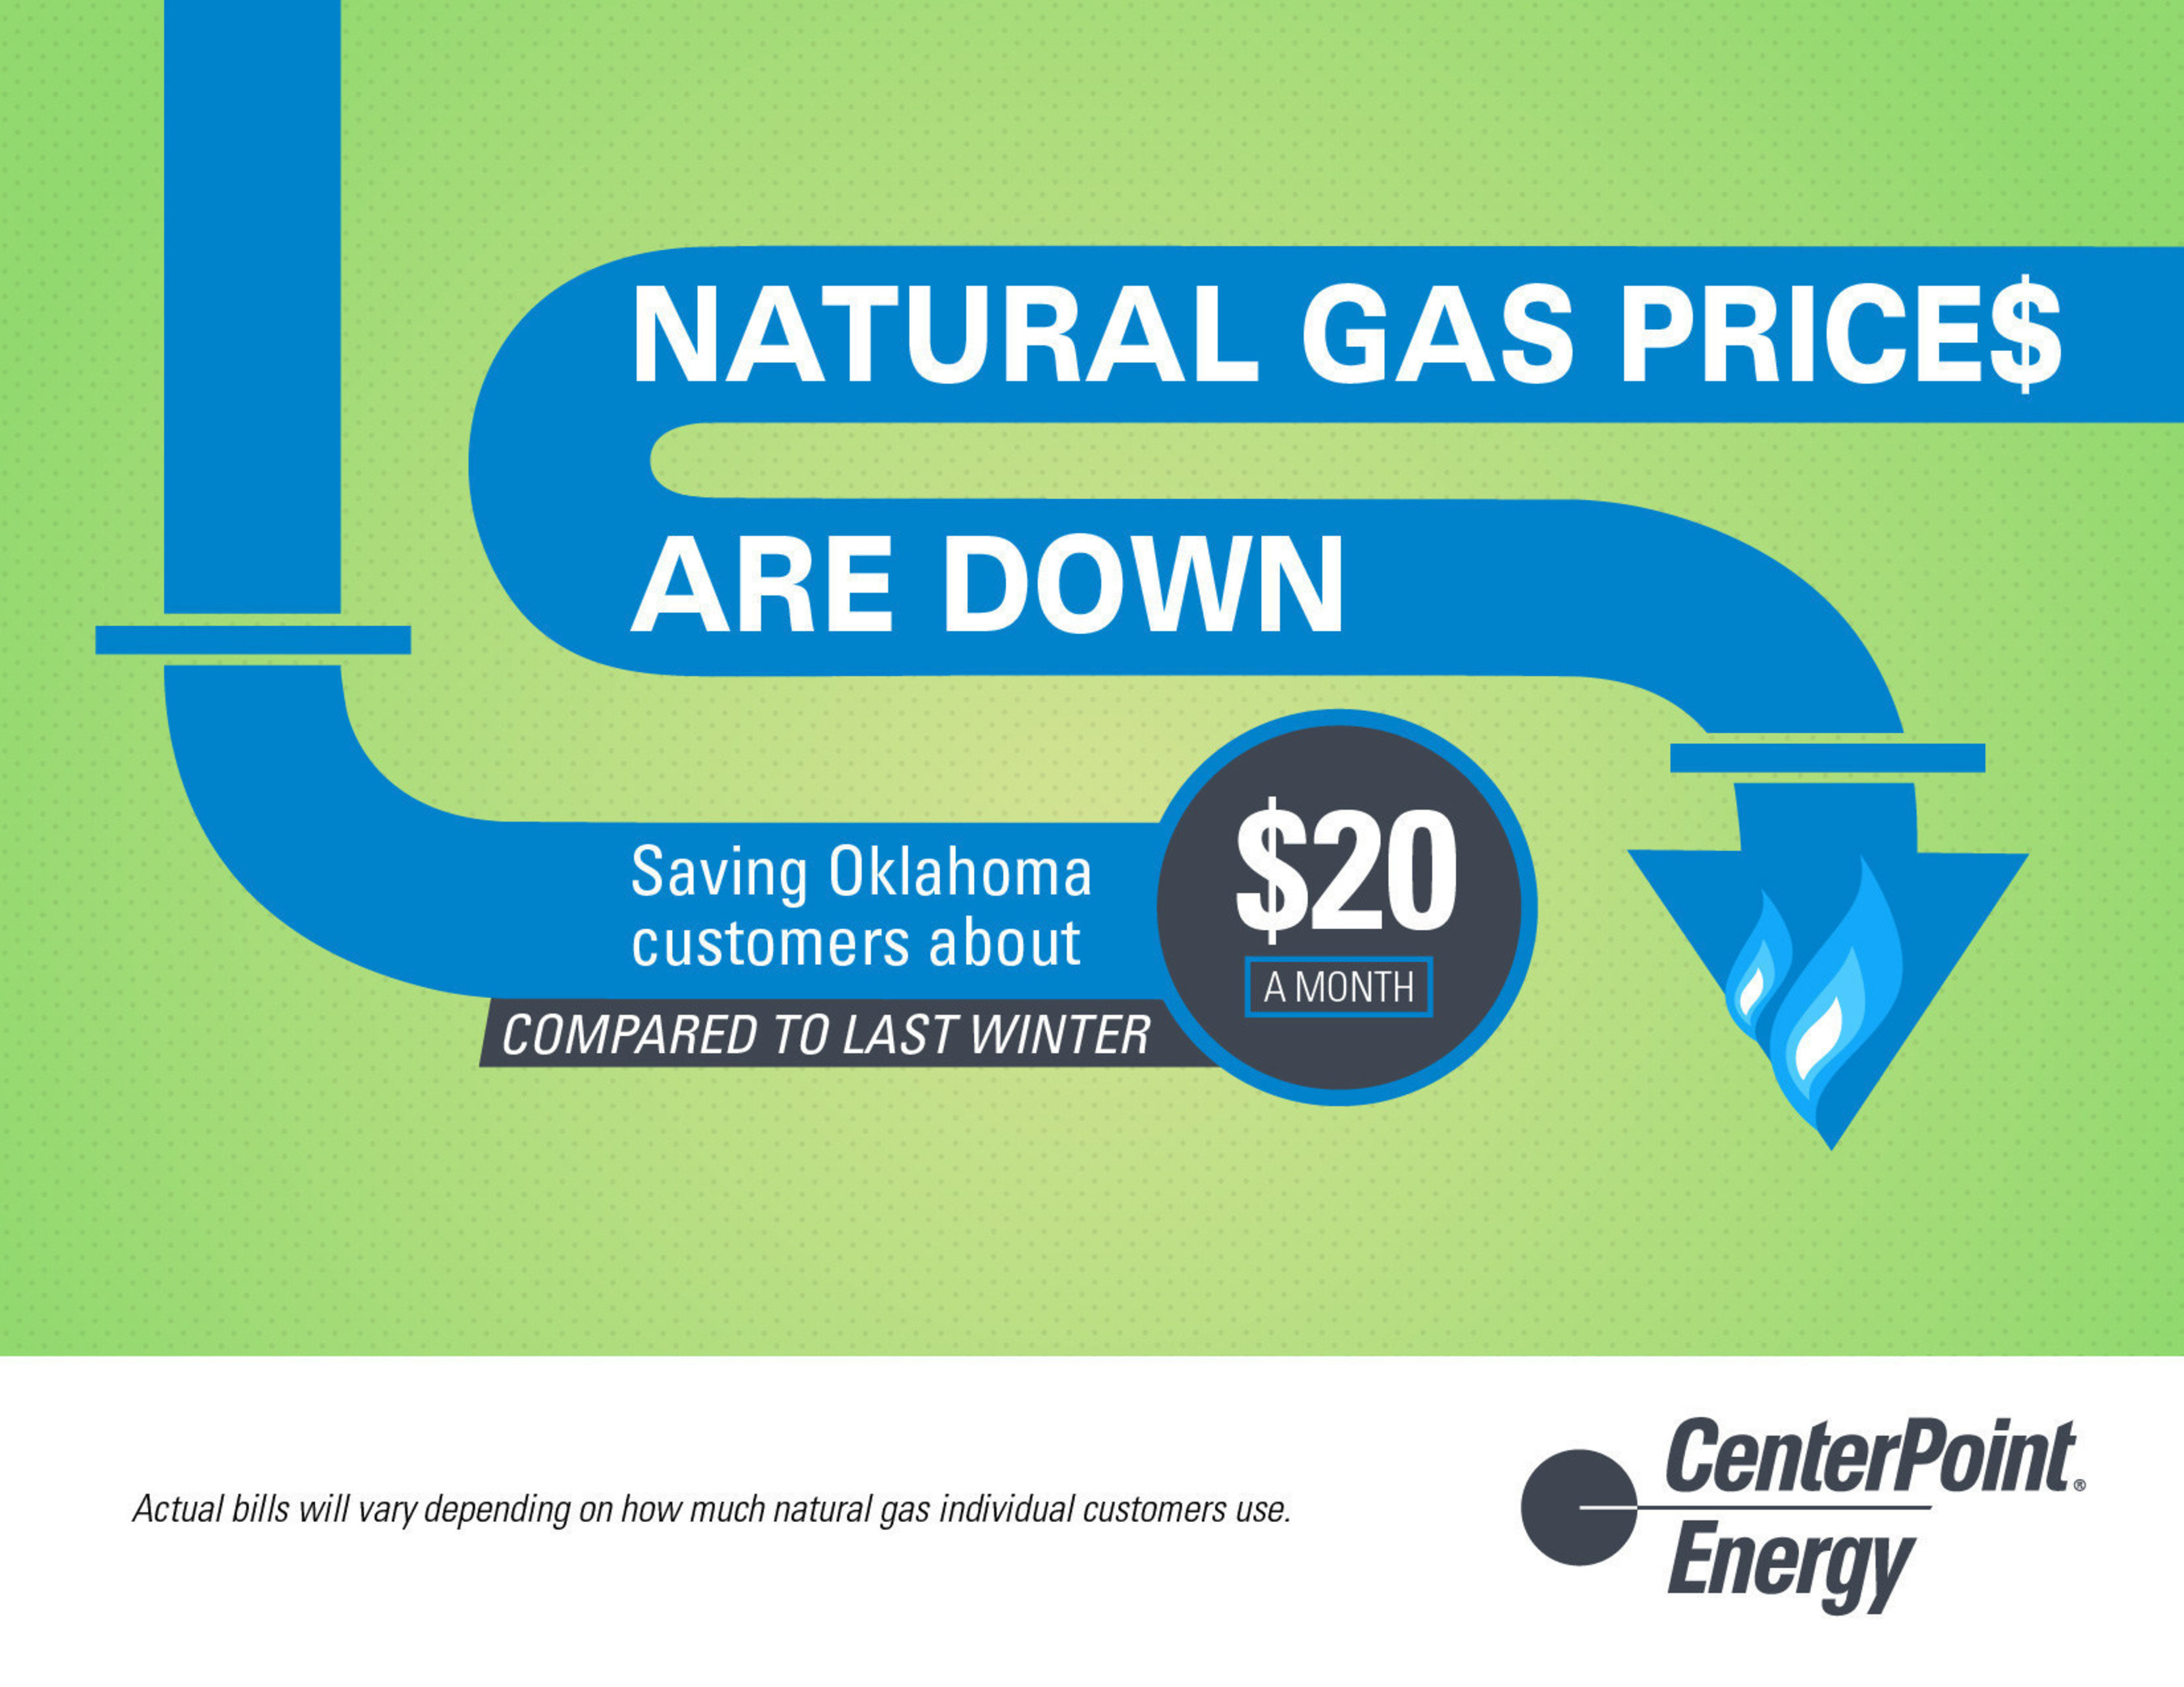 falling-natural-gas-prices-mean-22-lower-gas-bills-for-centerpoint